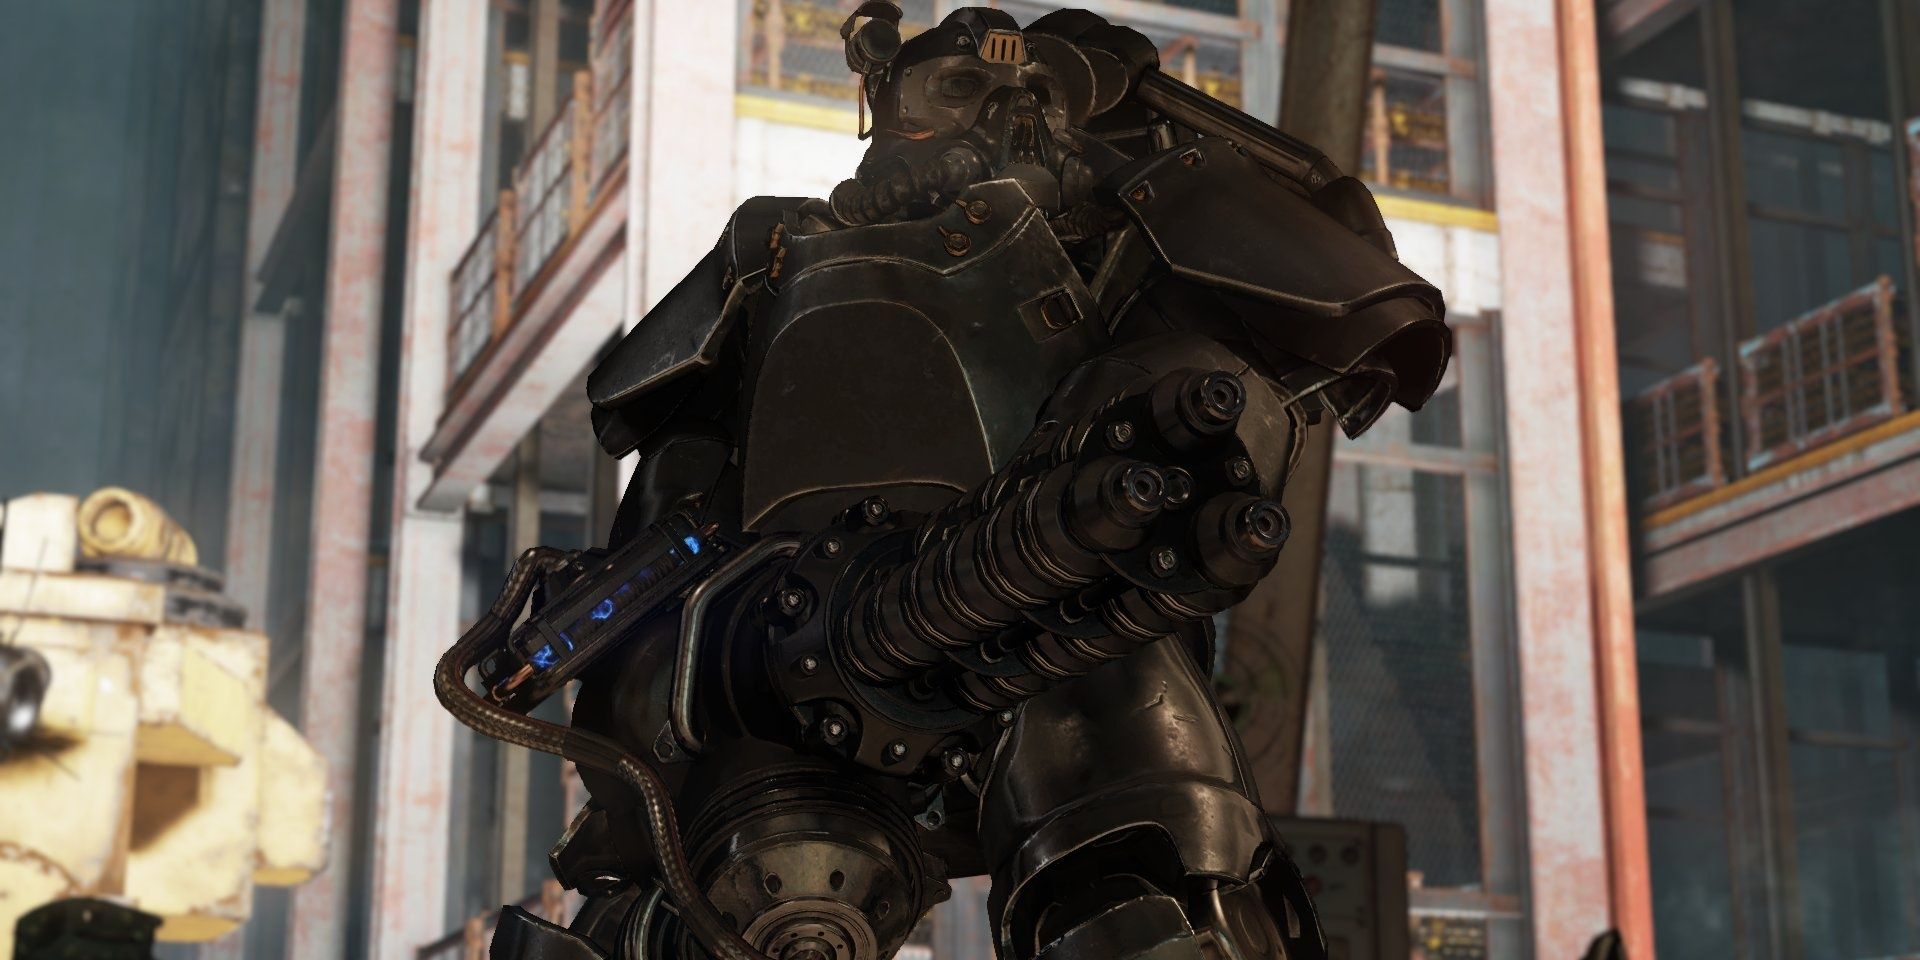 A large character in Power Armor wields the Gauss Minigun in Fallout 76.